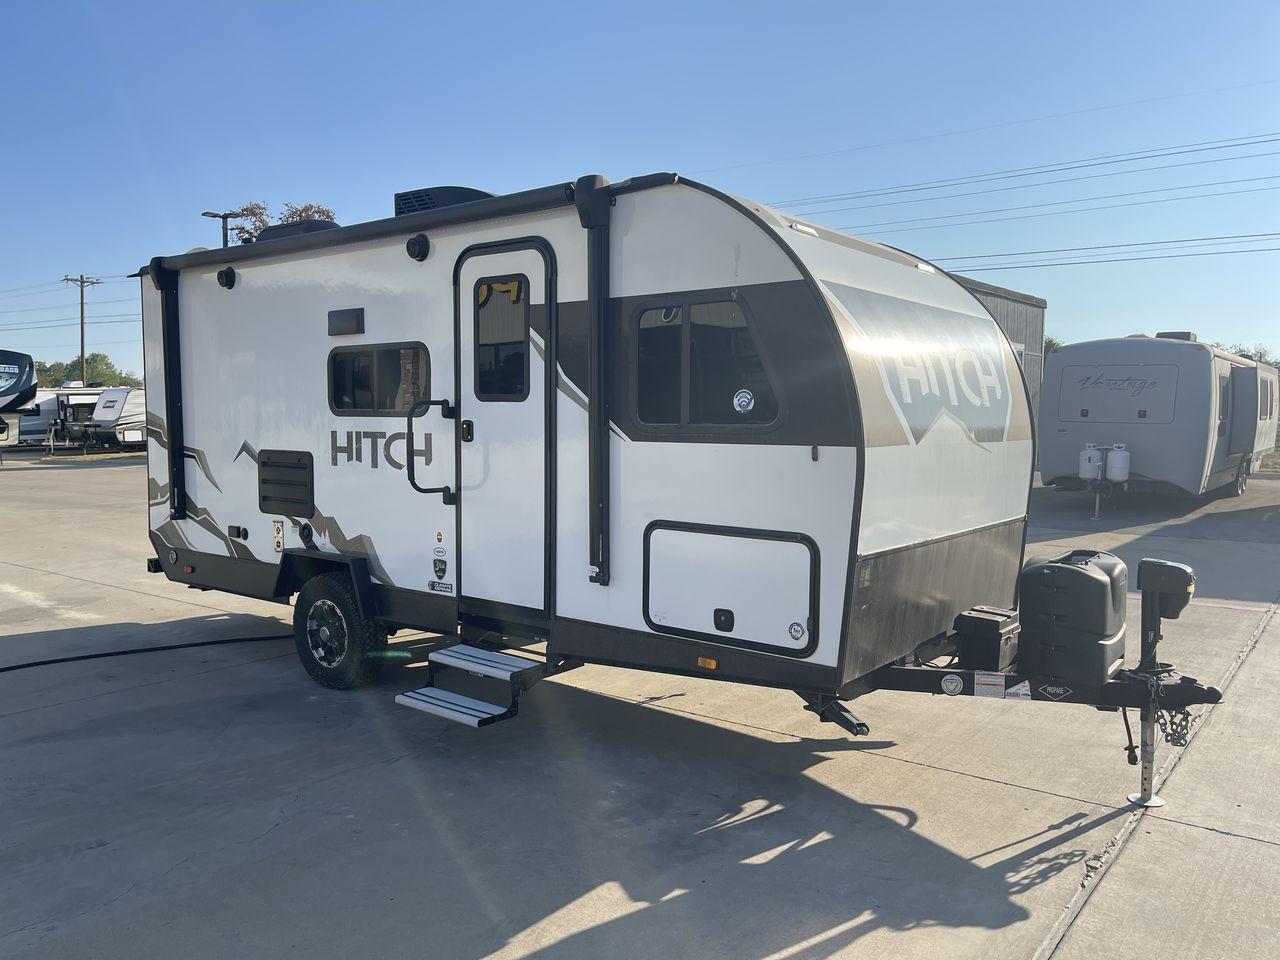 2022 CRUISER RV HITCH 18BHS (5RXRB2319N1) , Length: 22 ft | Dry Weight: 4,030 lbs | Gross Weight: 5,000 lbs | Slides: 1 transmission, located at 4319 N Main St, Cleburne, TX, 76033, (817) 678-5133, 32.385960, -97.391212 - The 2022 Cruiser RV Corp Hitch 18BHS is a compact yet feature-packed travel trailer perfect for those who value comfort and convenience during their travels. Featuring a sleek and modern exterior design, this lightweight trailer measures approximately 22 feet in length, making it easy to tow and man - Photo #22